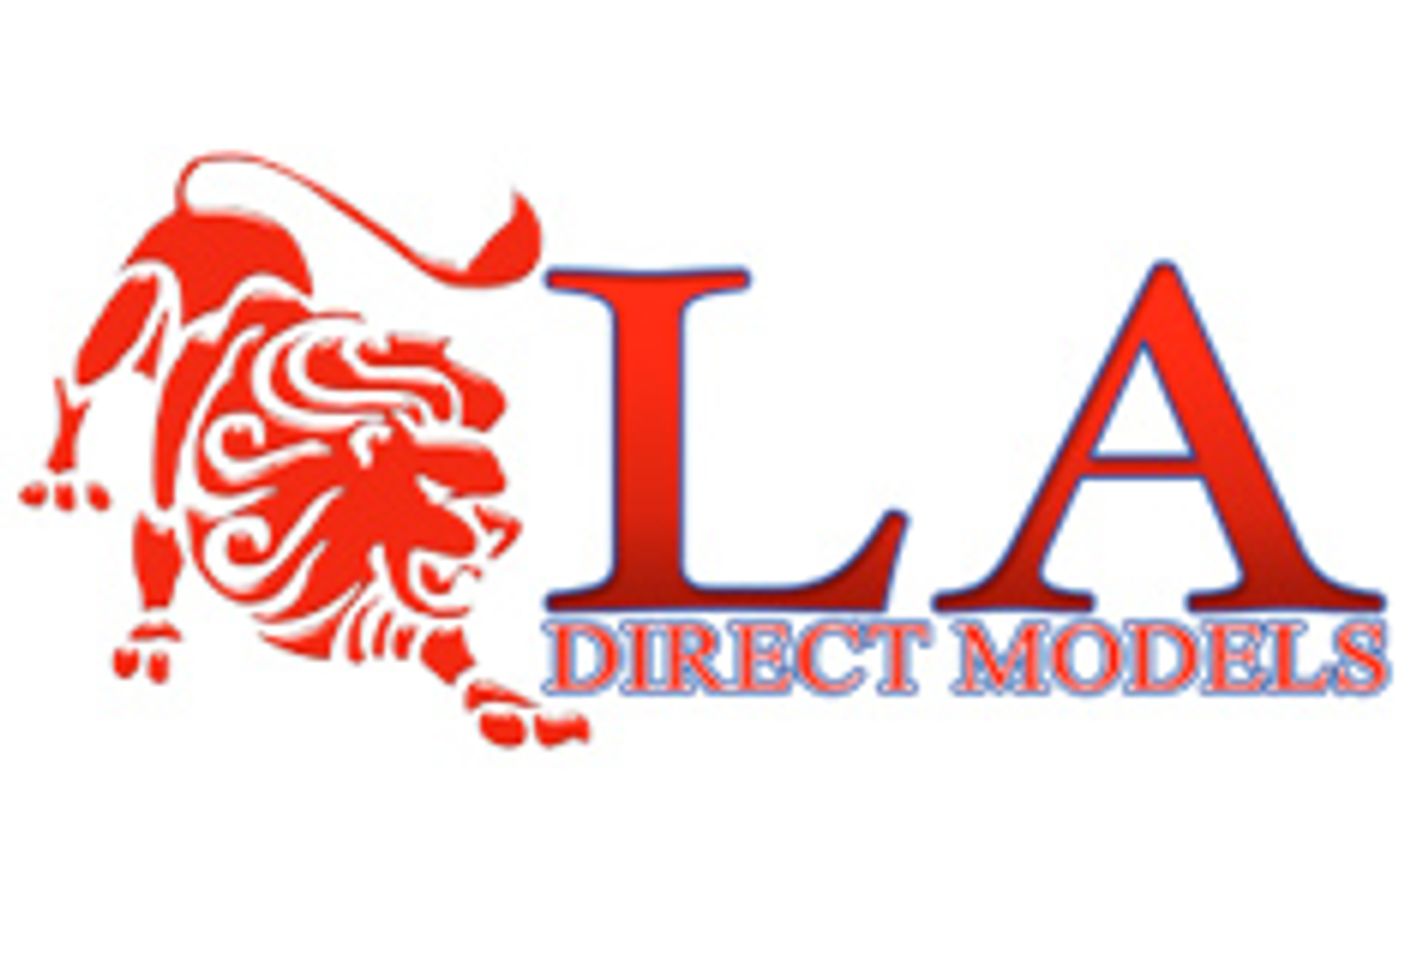 LA Direct Models’ A-List Takes Over Exxxotica New Jersey